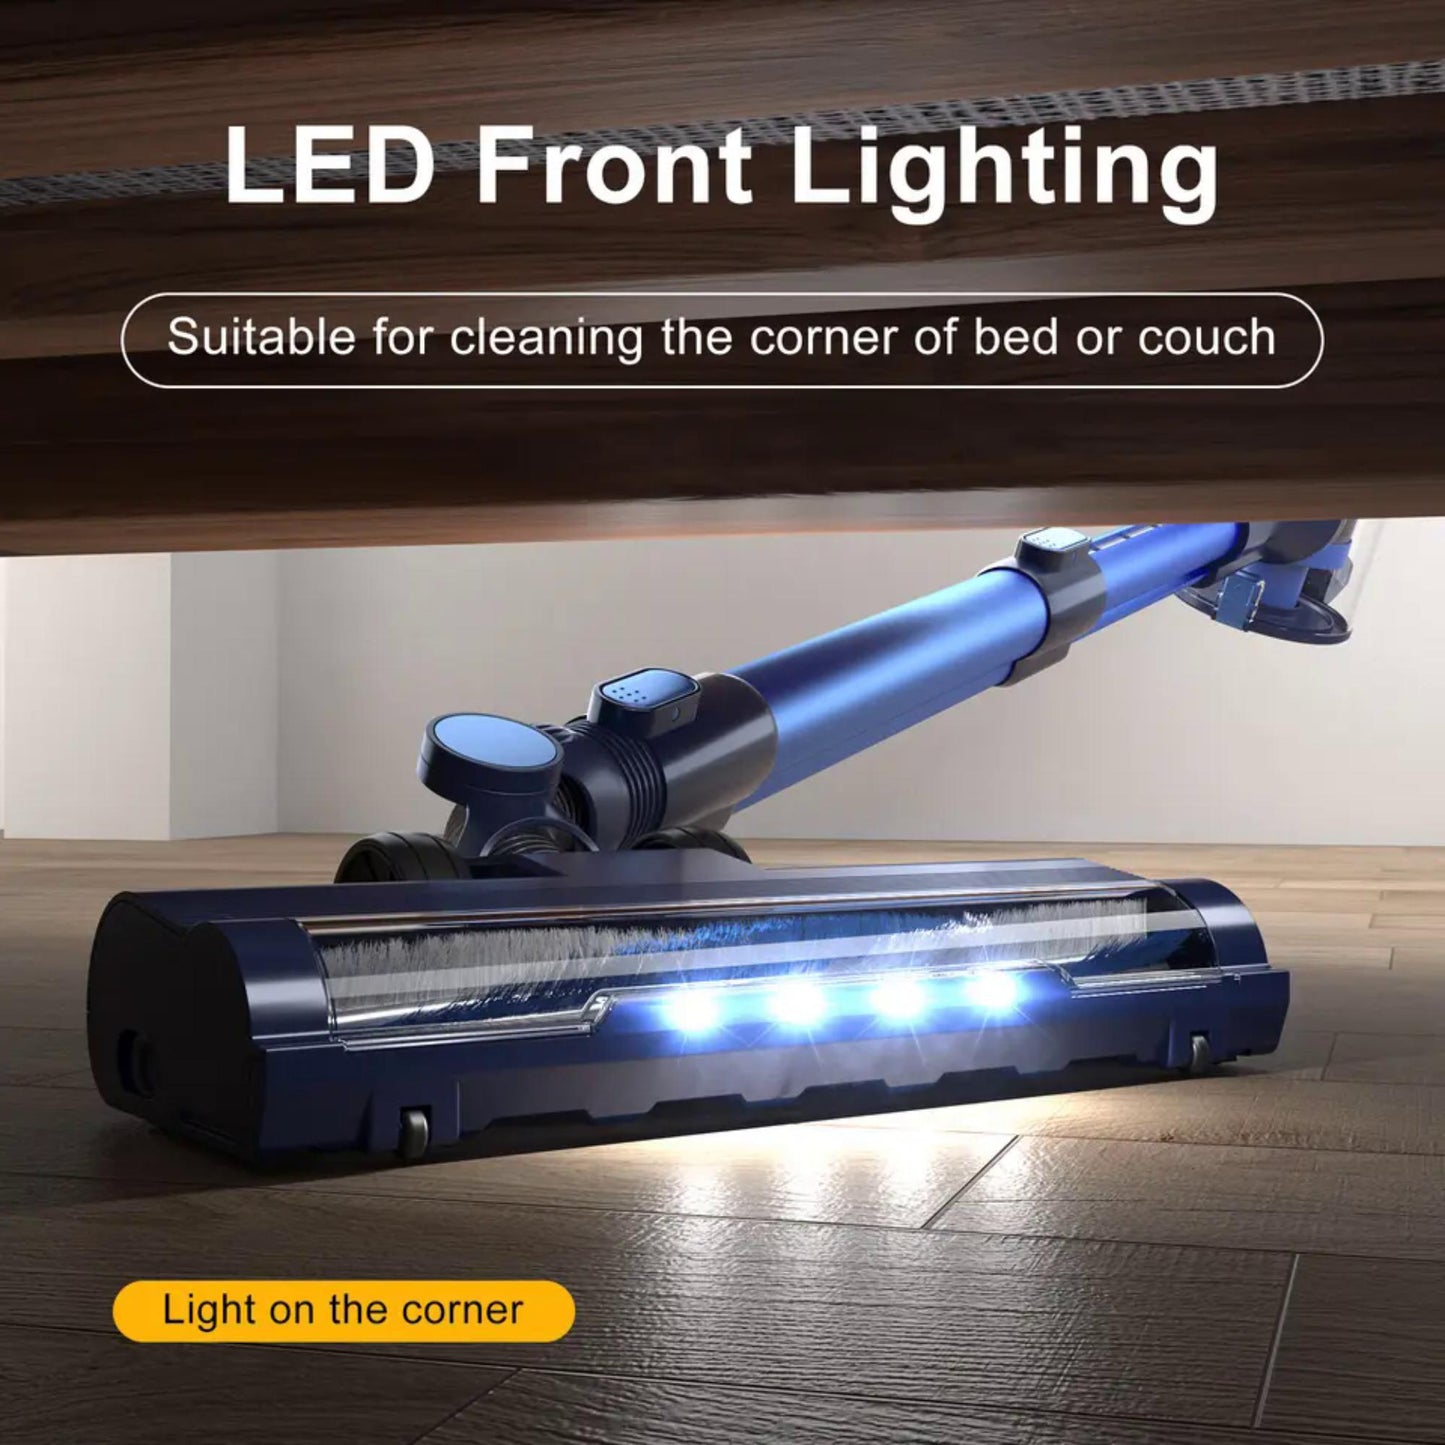 Pretty Care P3 Stick Vacuum Cleaner with LED Front Lighting. | Blue Chilli Electronics.